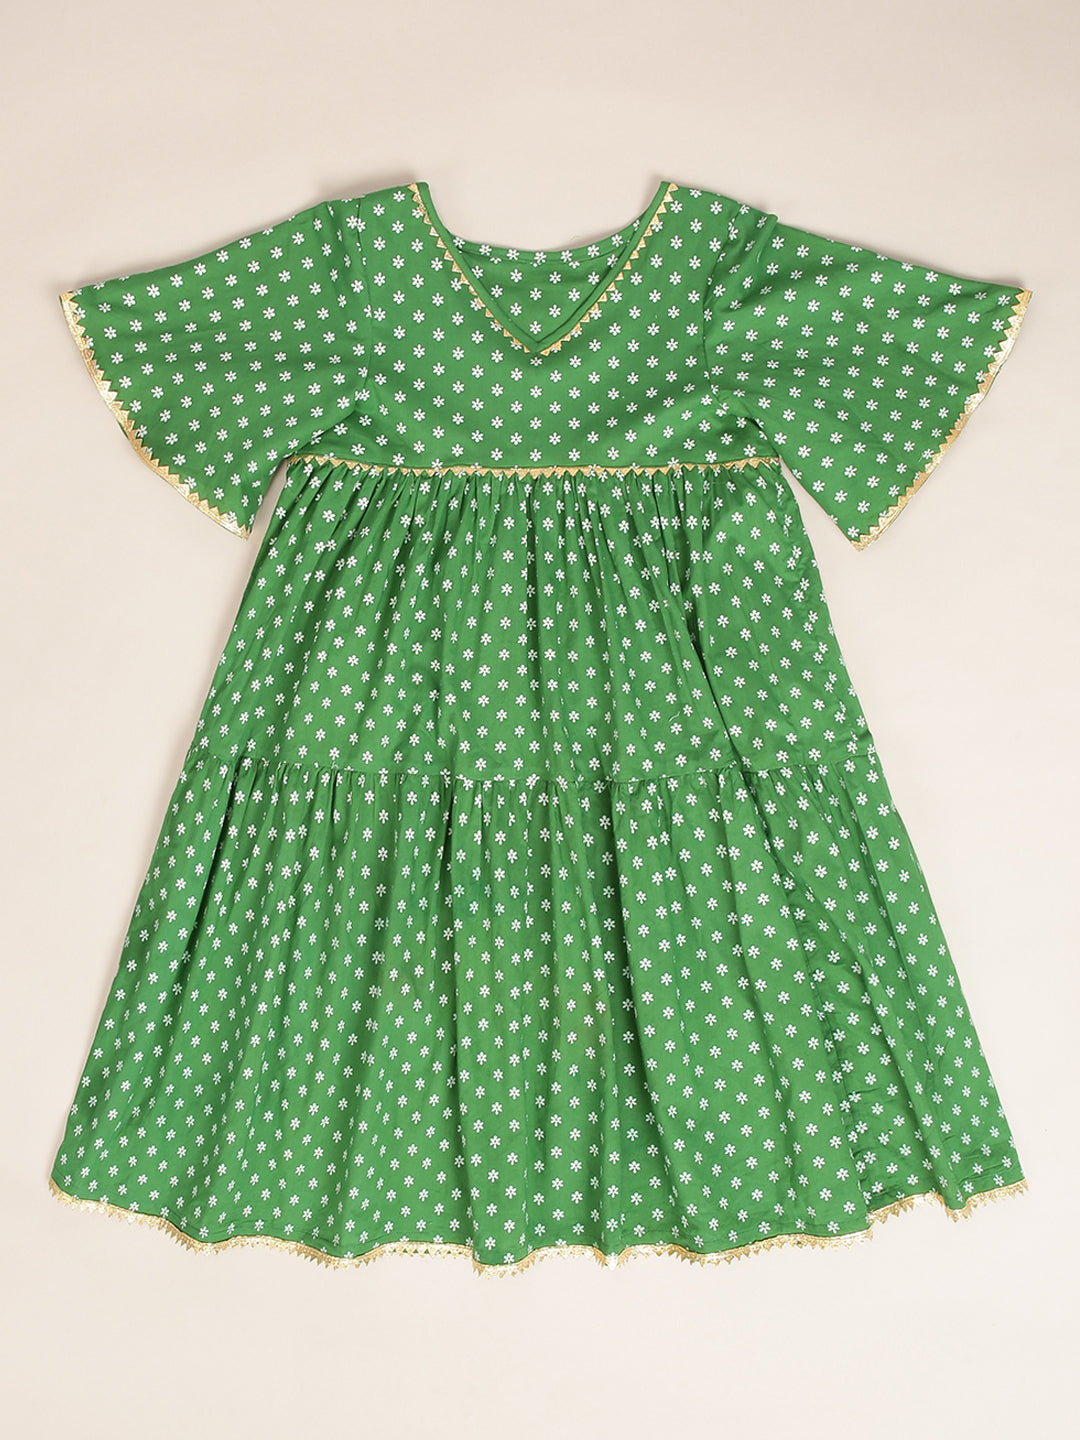 Girls Cotton Green Dress - 4 yrs to 12 yrs - Front 